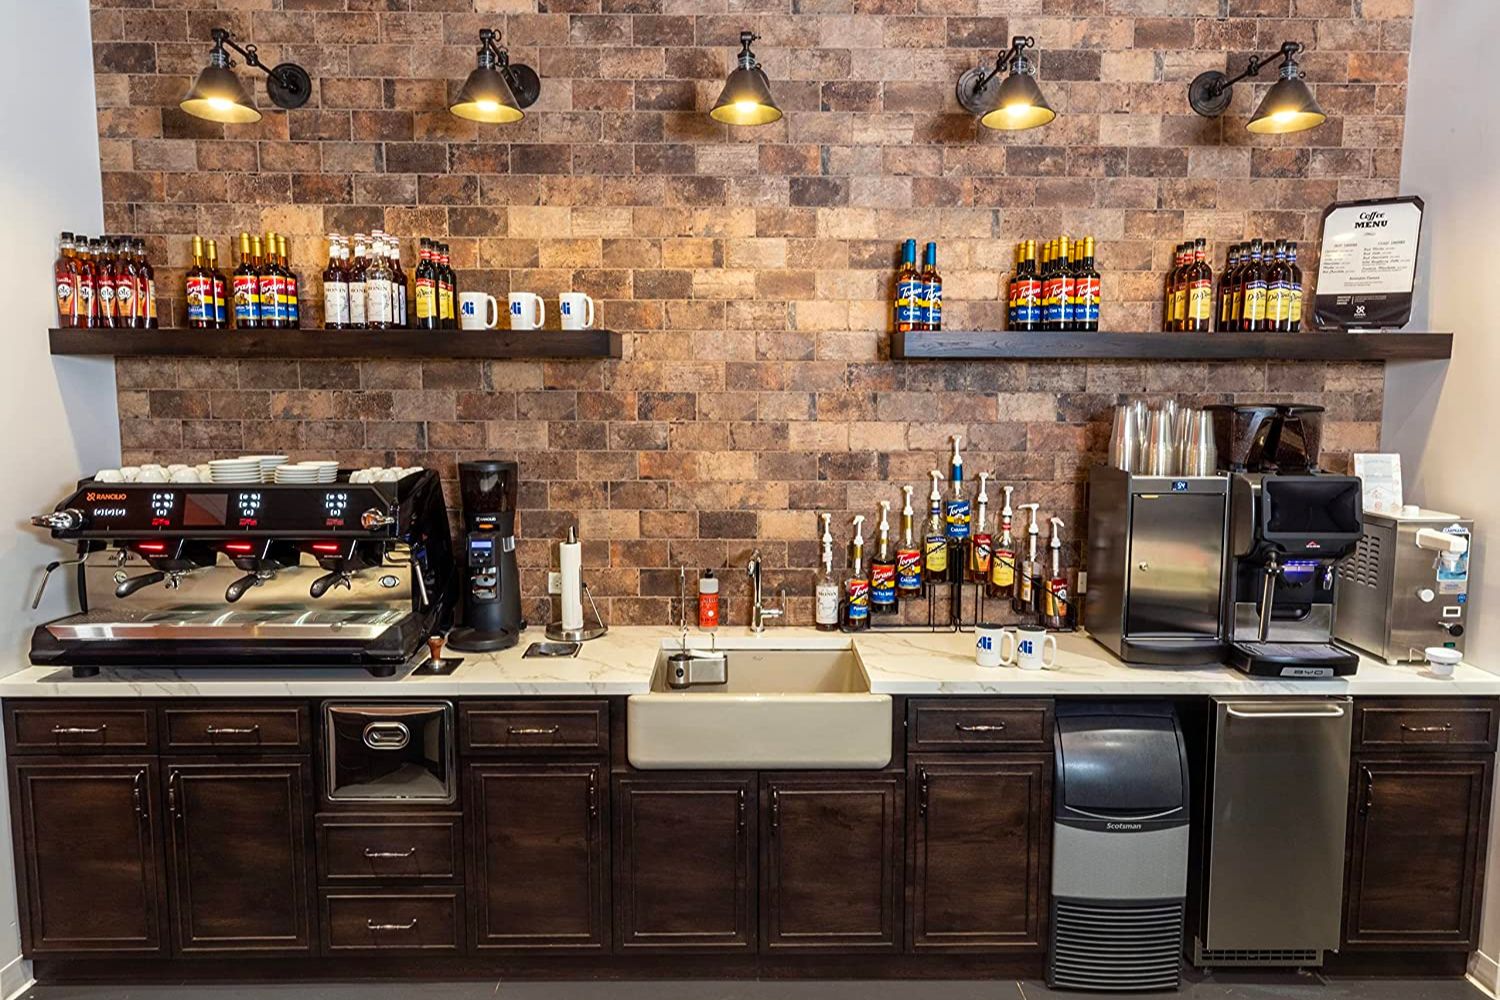 The best undercounter ice maker installed in a well-stocked home bar